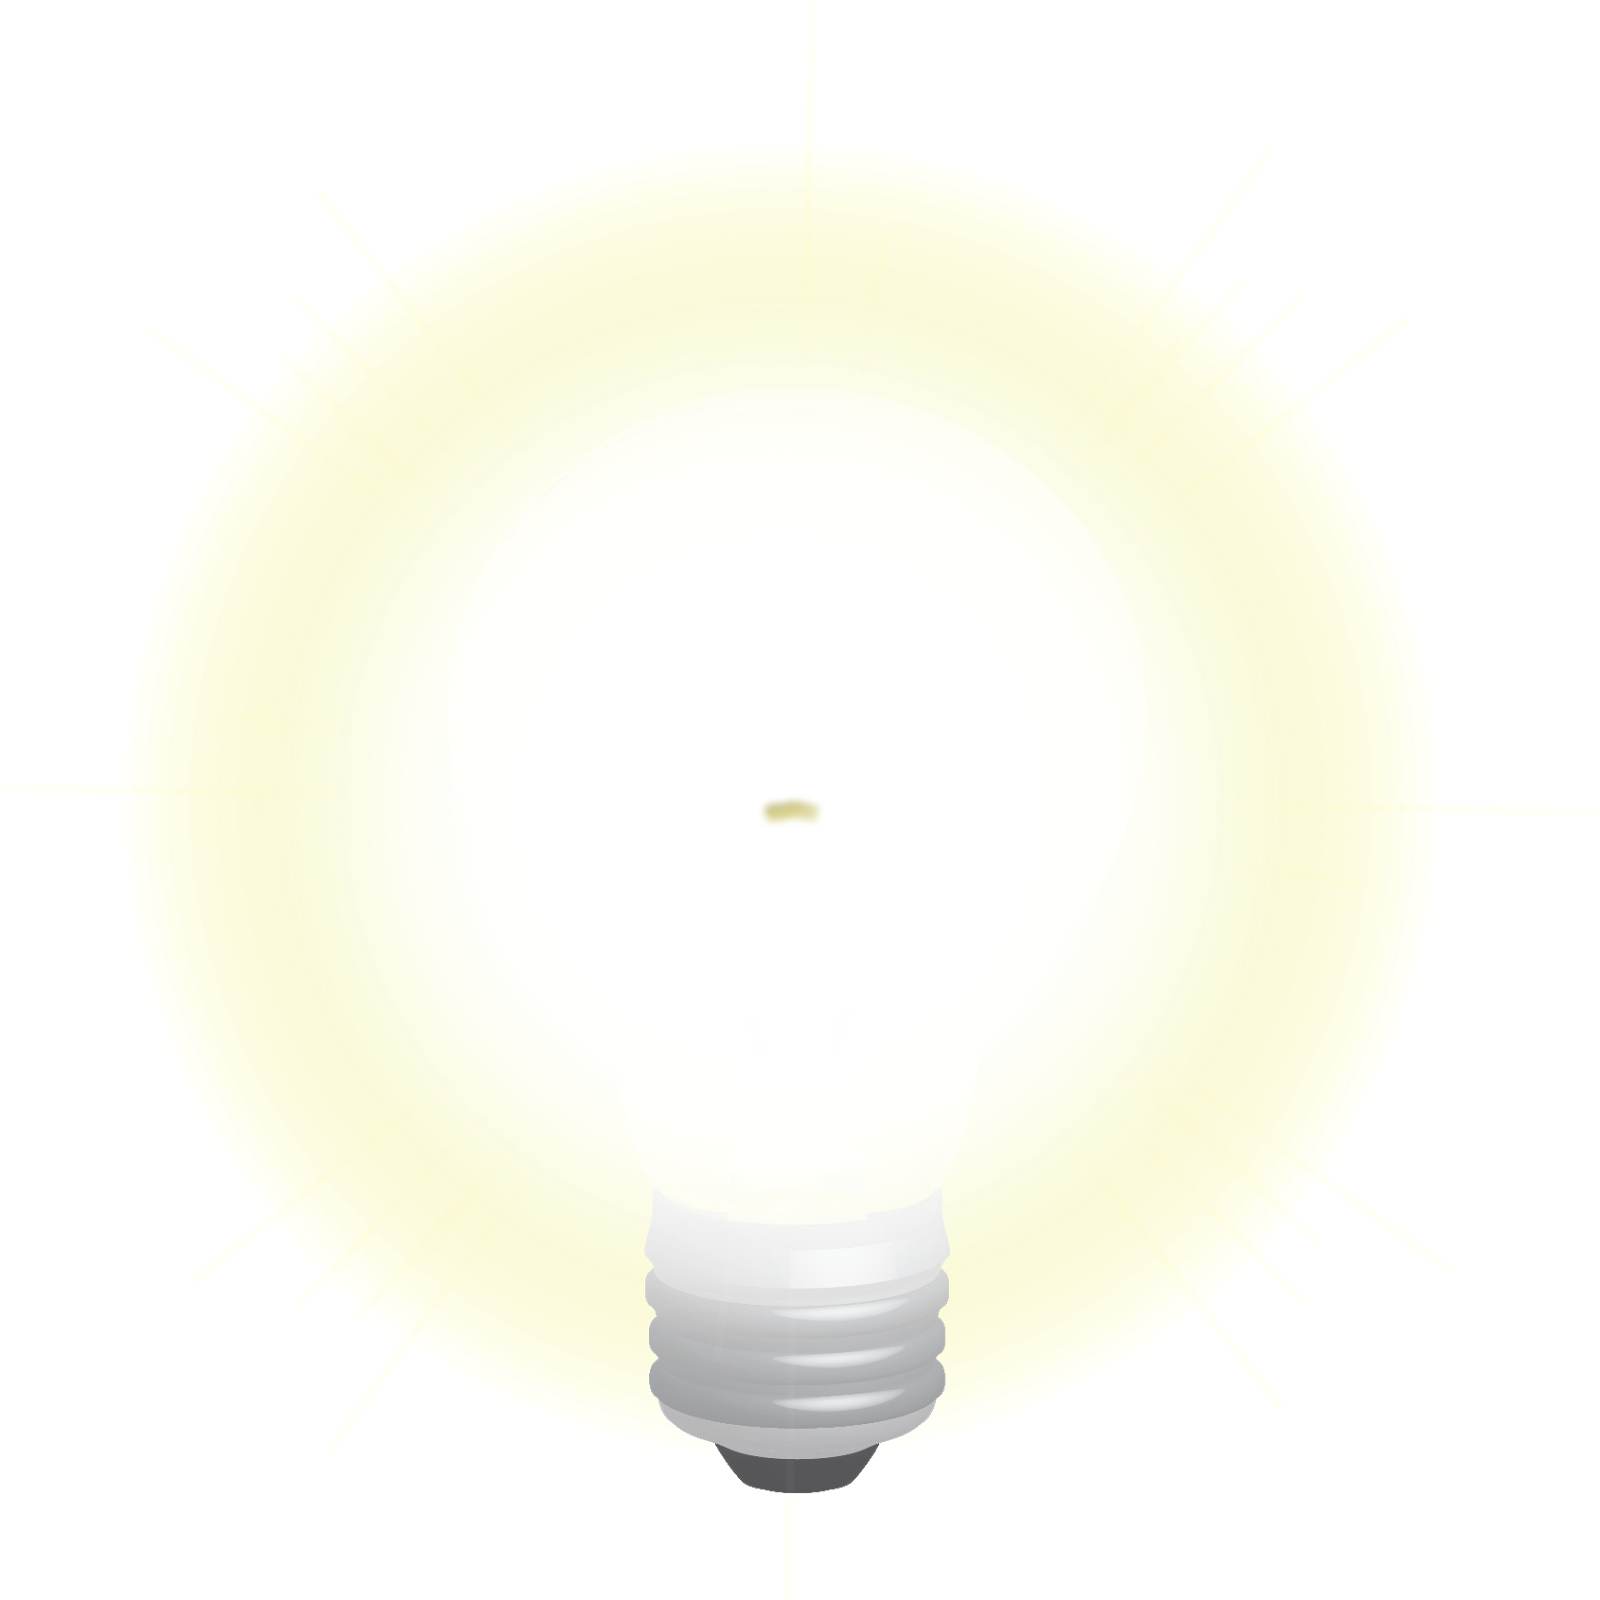 Incandescence Light Energy Incandescent Bulb HQ Image Free PNG Clipart